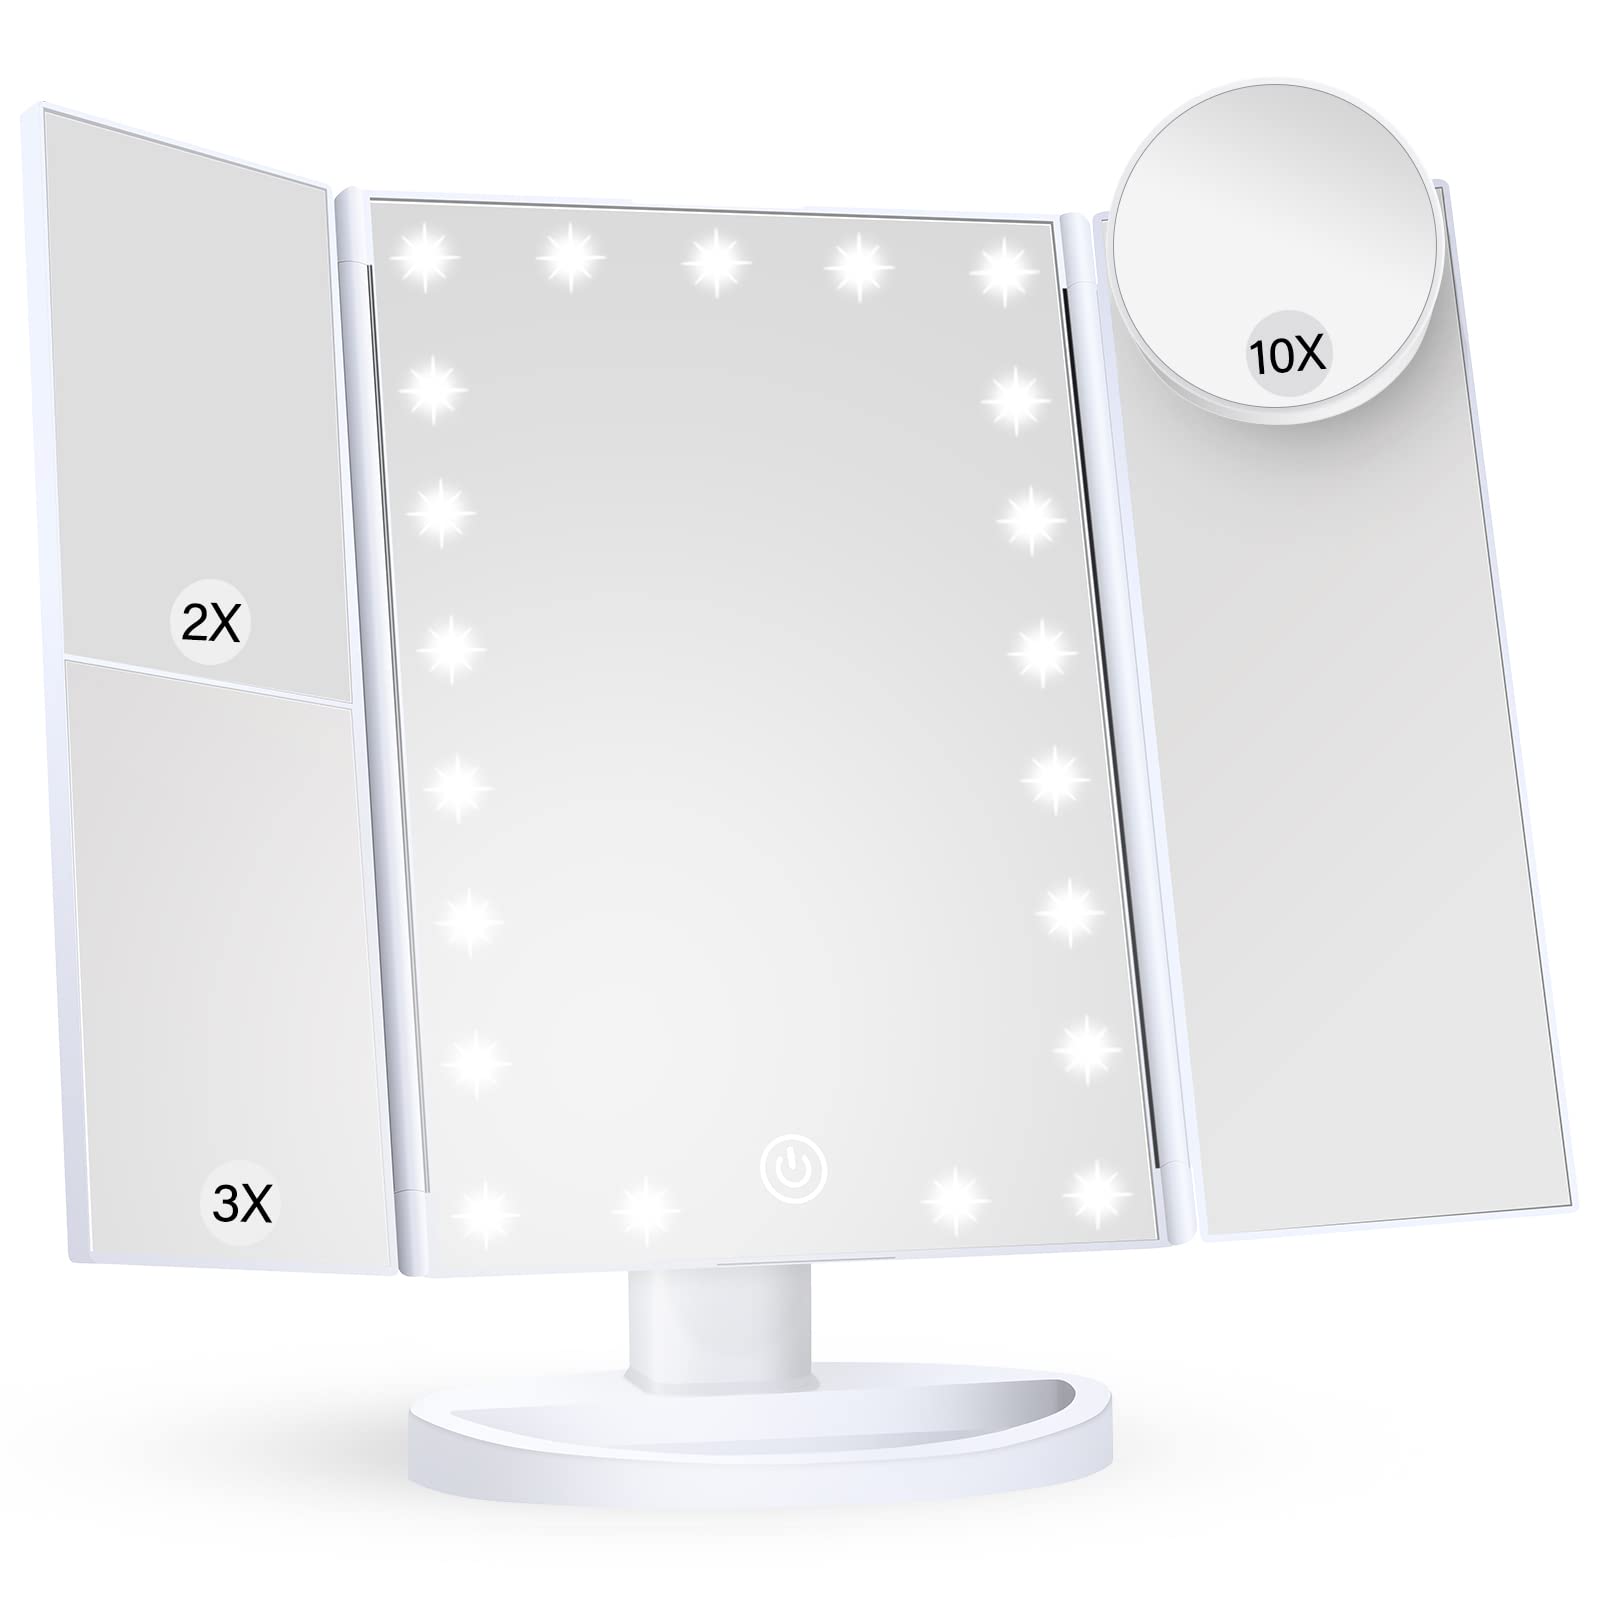 Lighted Makeup Mirror Touch Control Trifold Dual Power Supply LED කාමර අලංකරණය